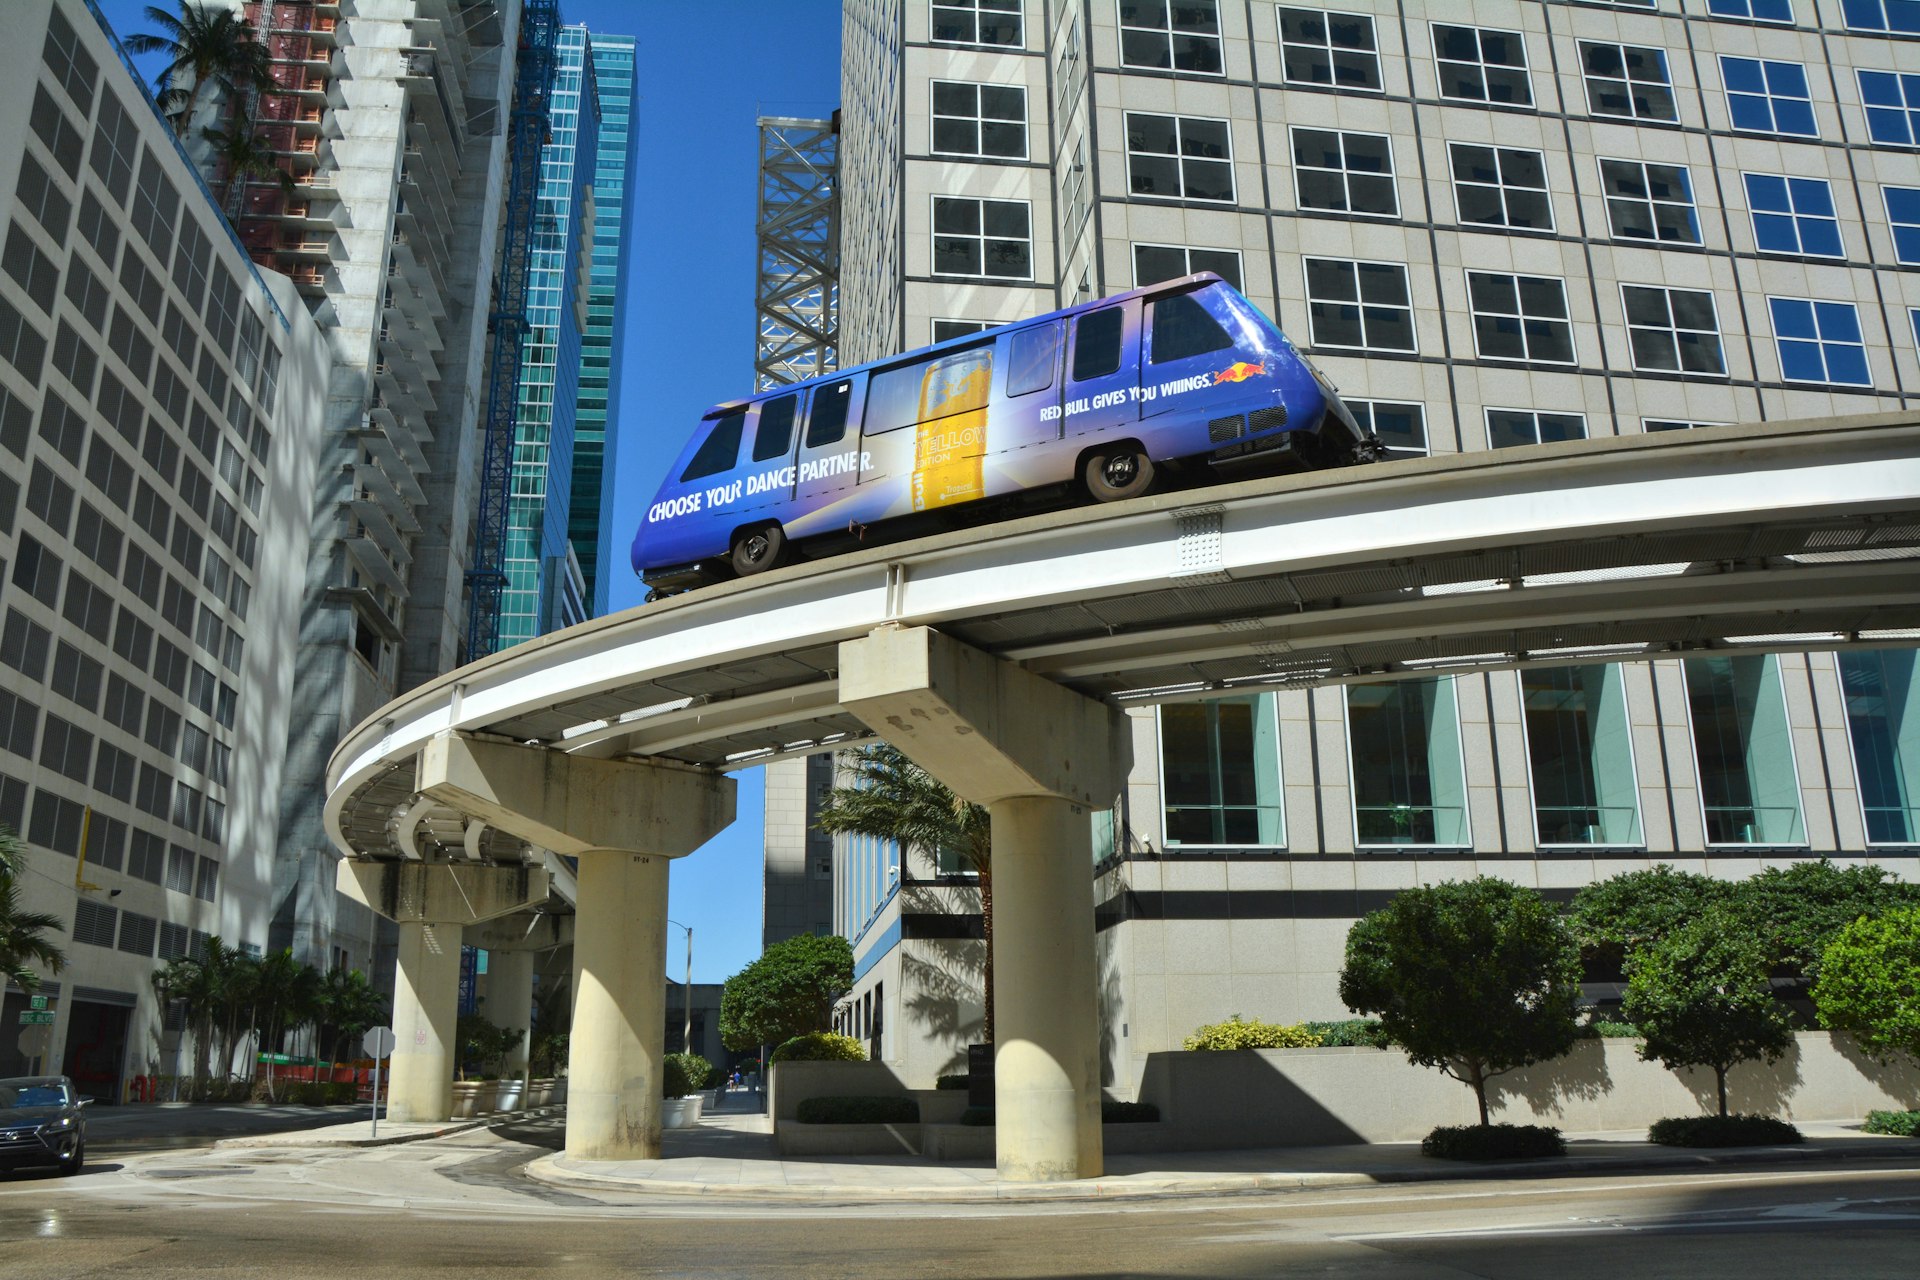 A one-car Metromover monorail train moves along an elevated track between high-rise buildings in Miami